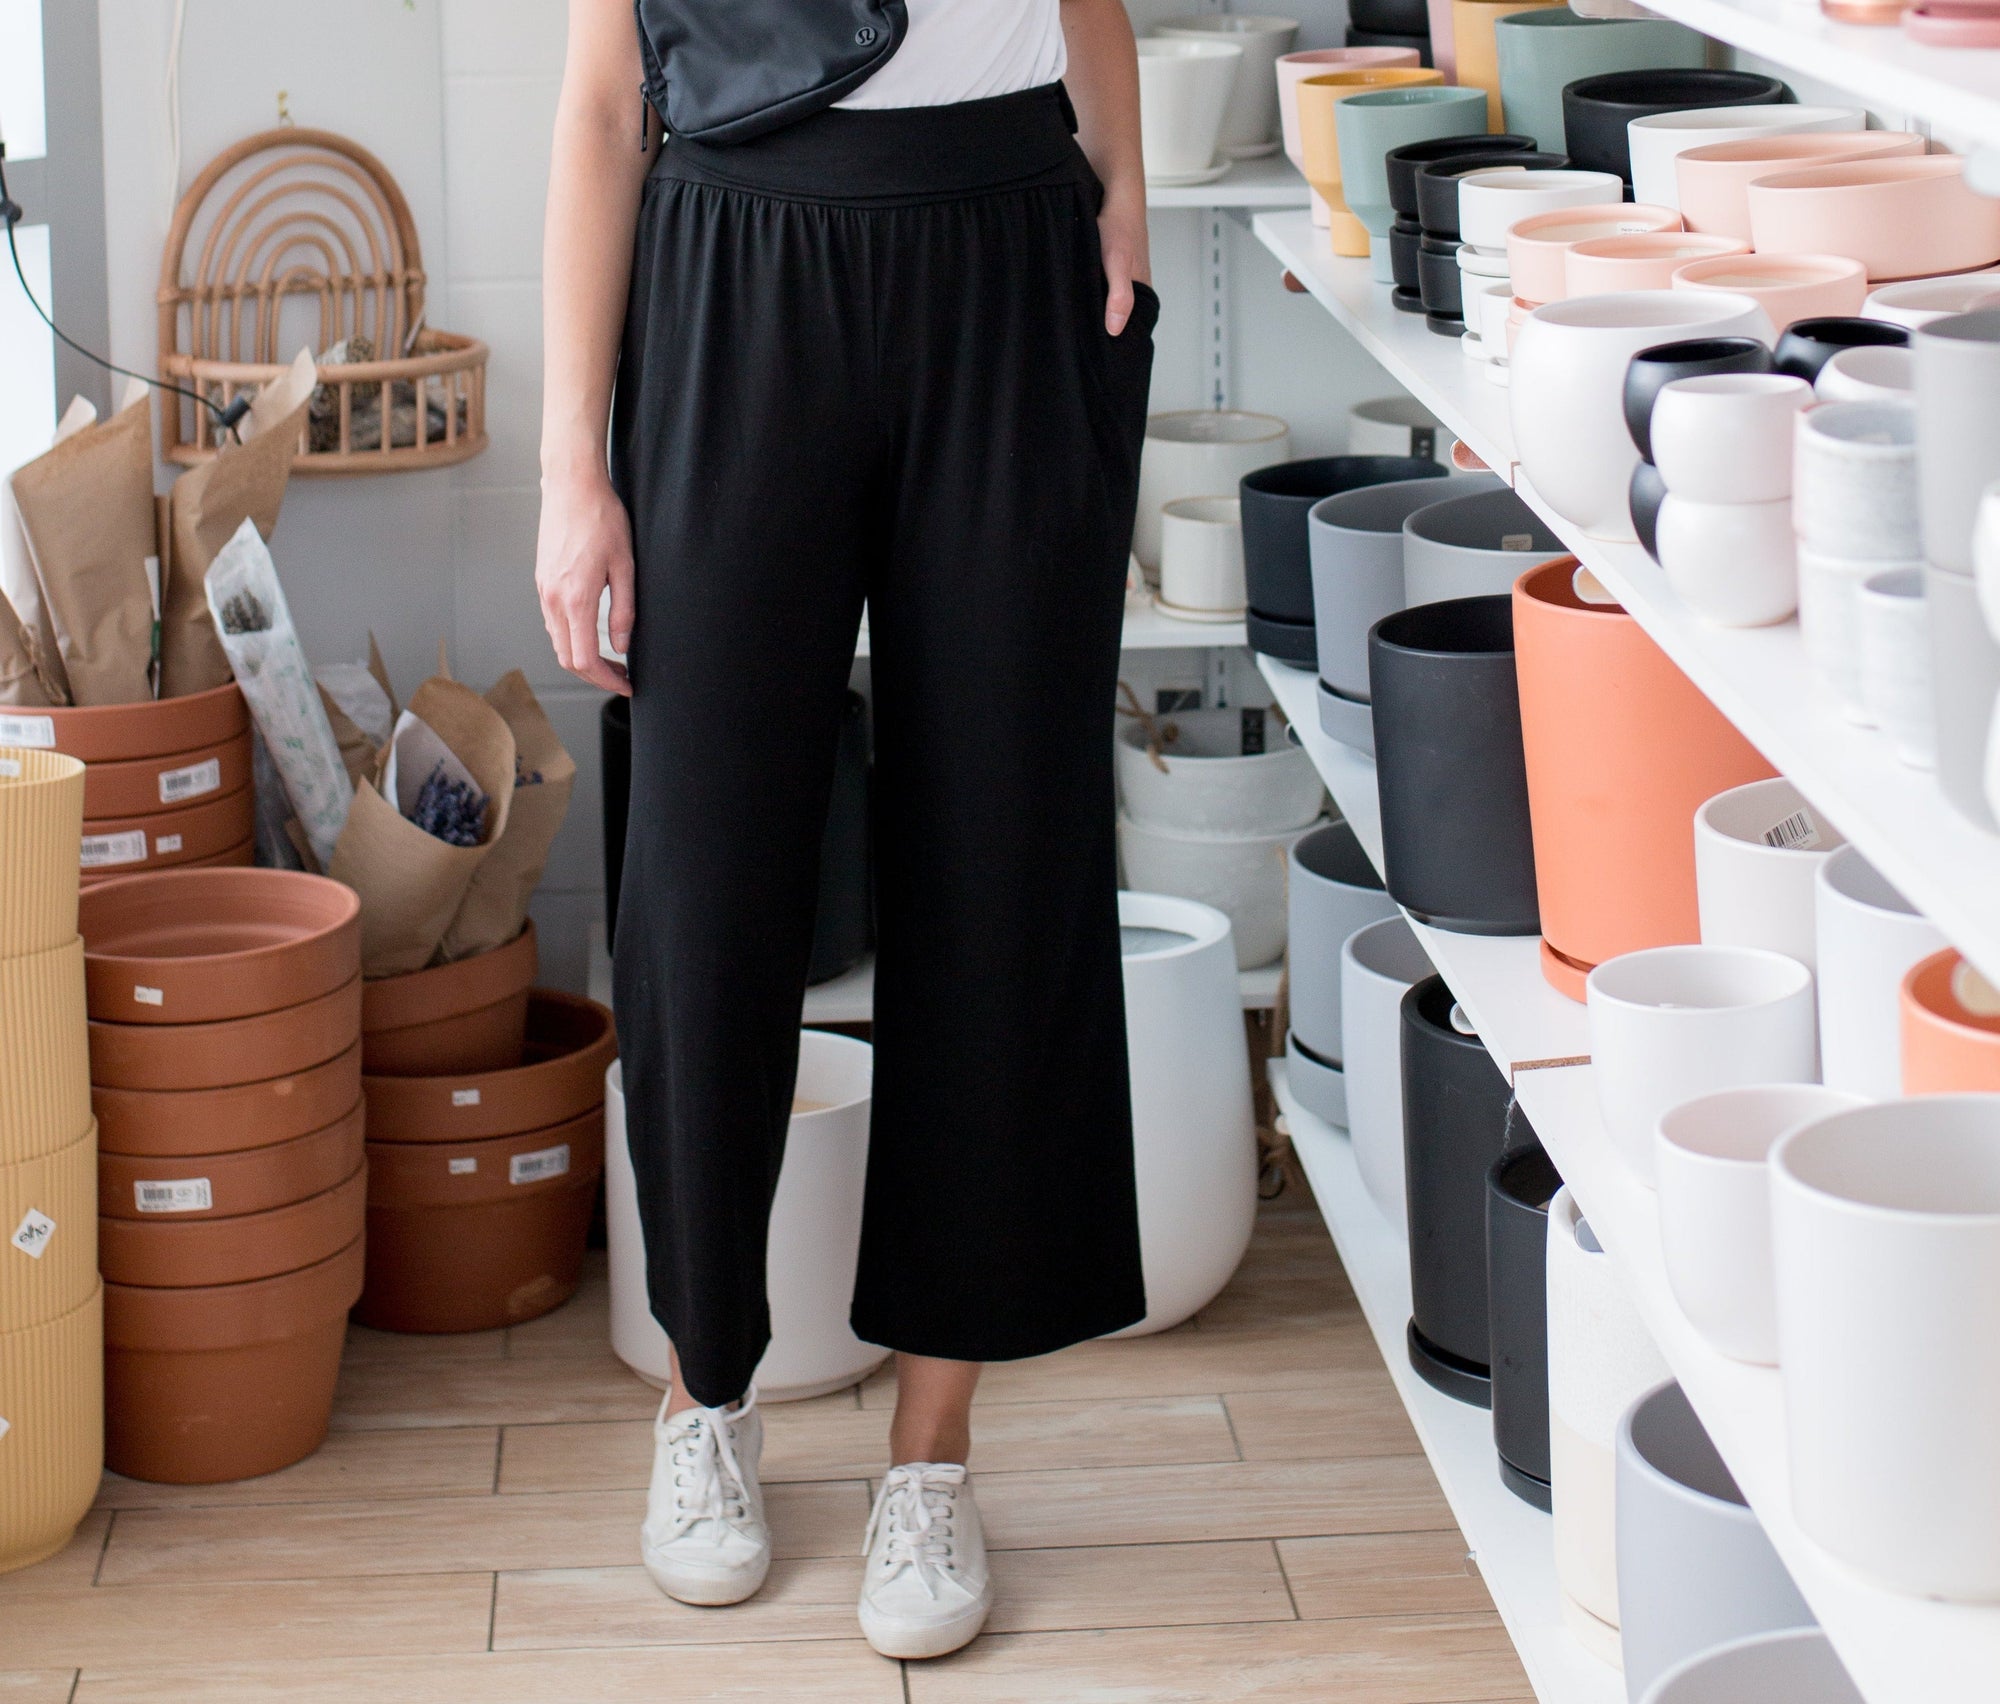 woman wearing white t shirt and black wide leg pants standing in a room with plant pots